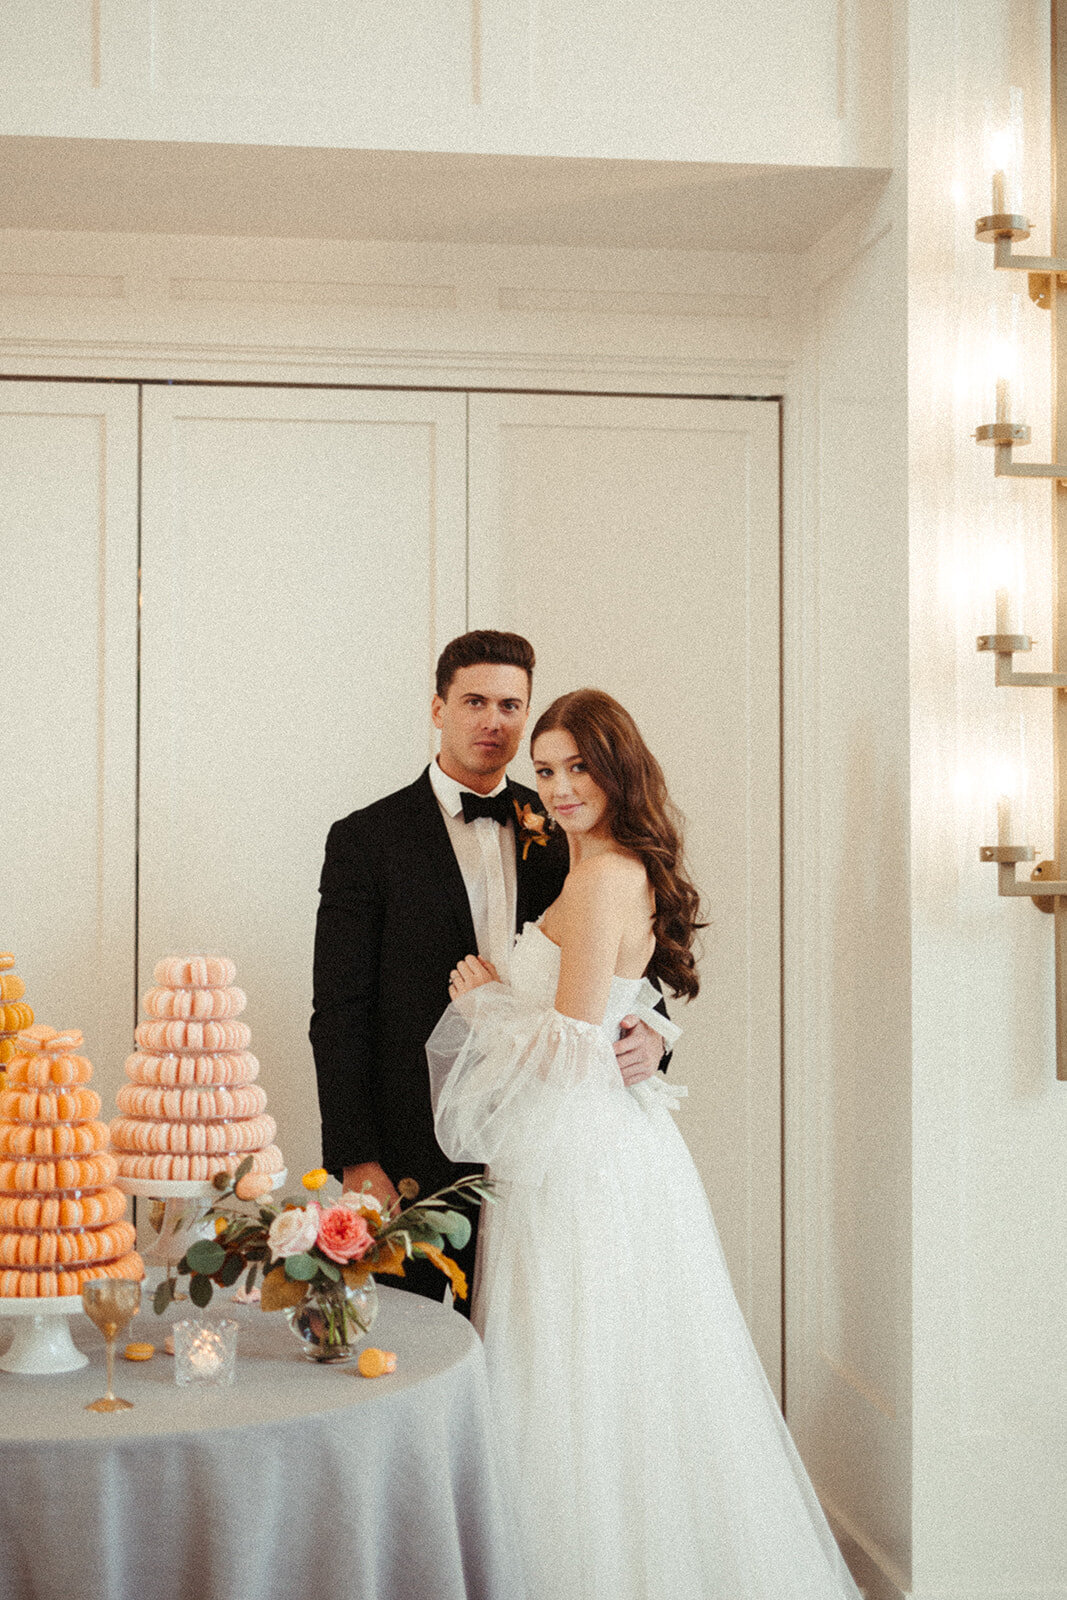 A bride and groom wearing a white wedding gown and black tuxedo lean stand next to a dessert table filled with macarons.